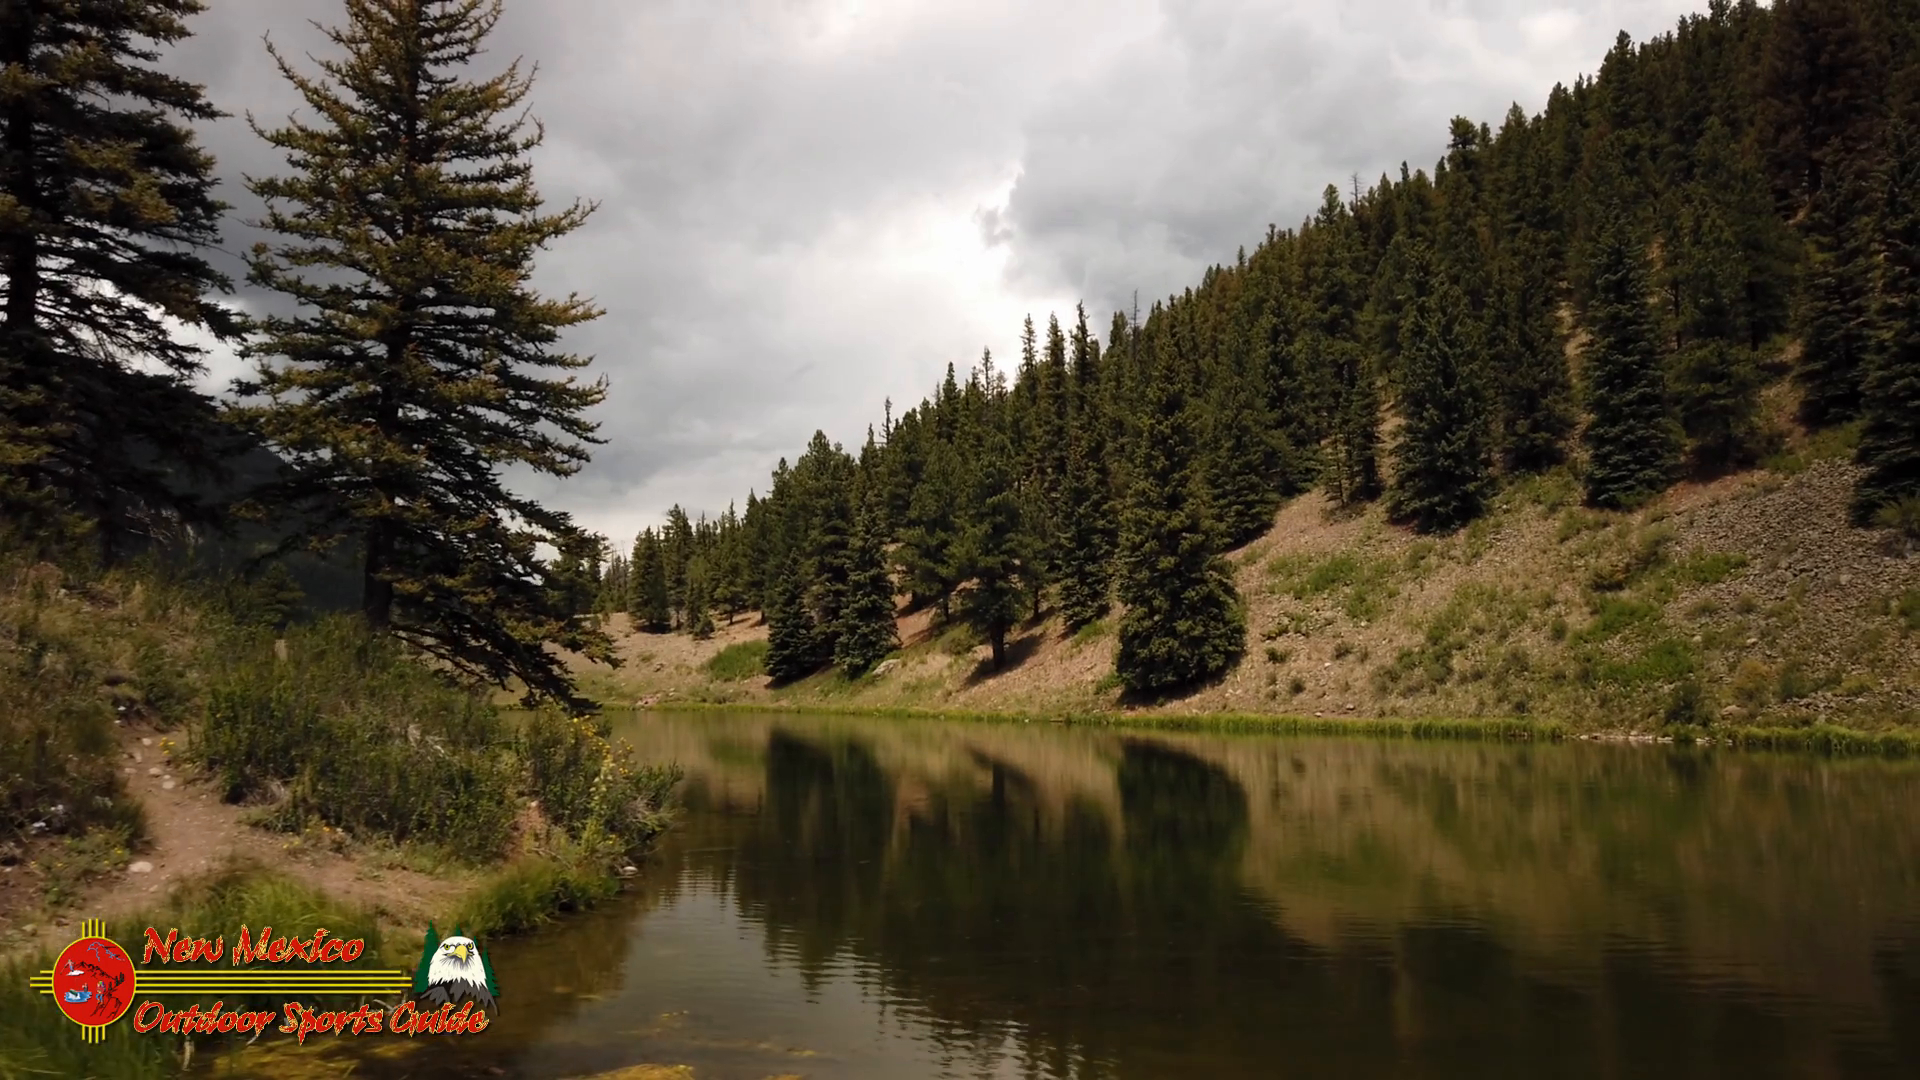 Spectacle Lake - Conejos River Trout Fishing Access